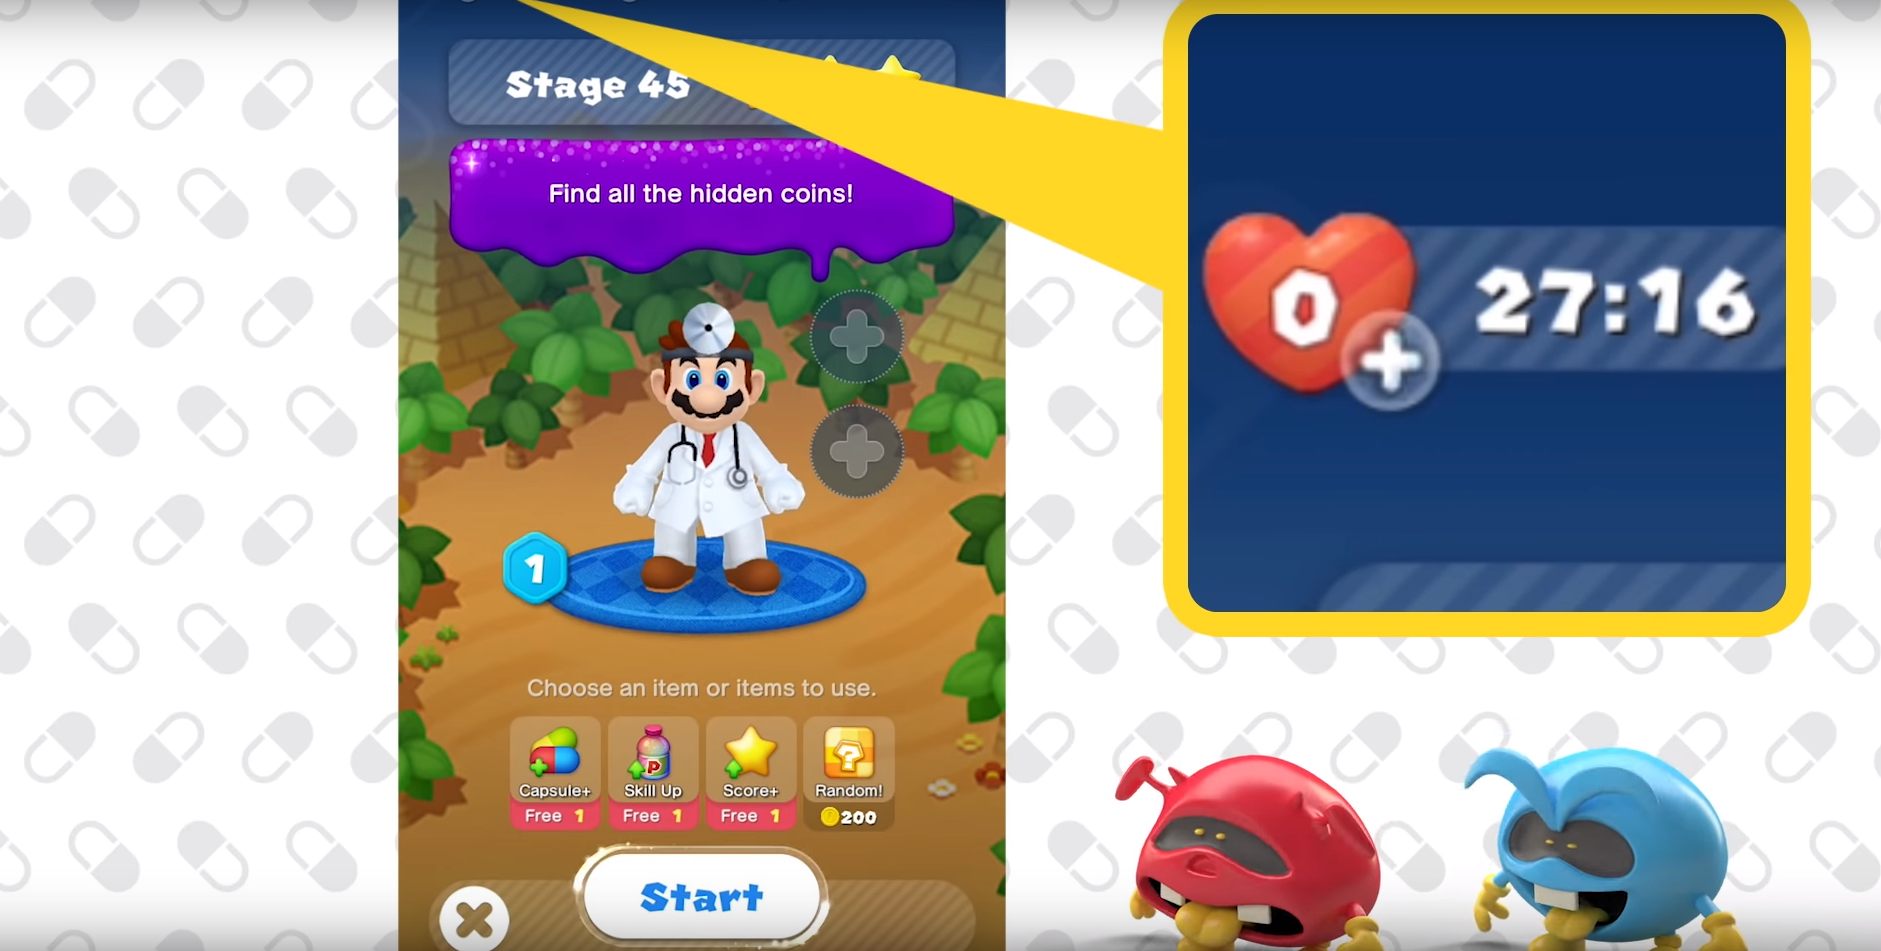 Dr. Mario World is getting online multiplayer